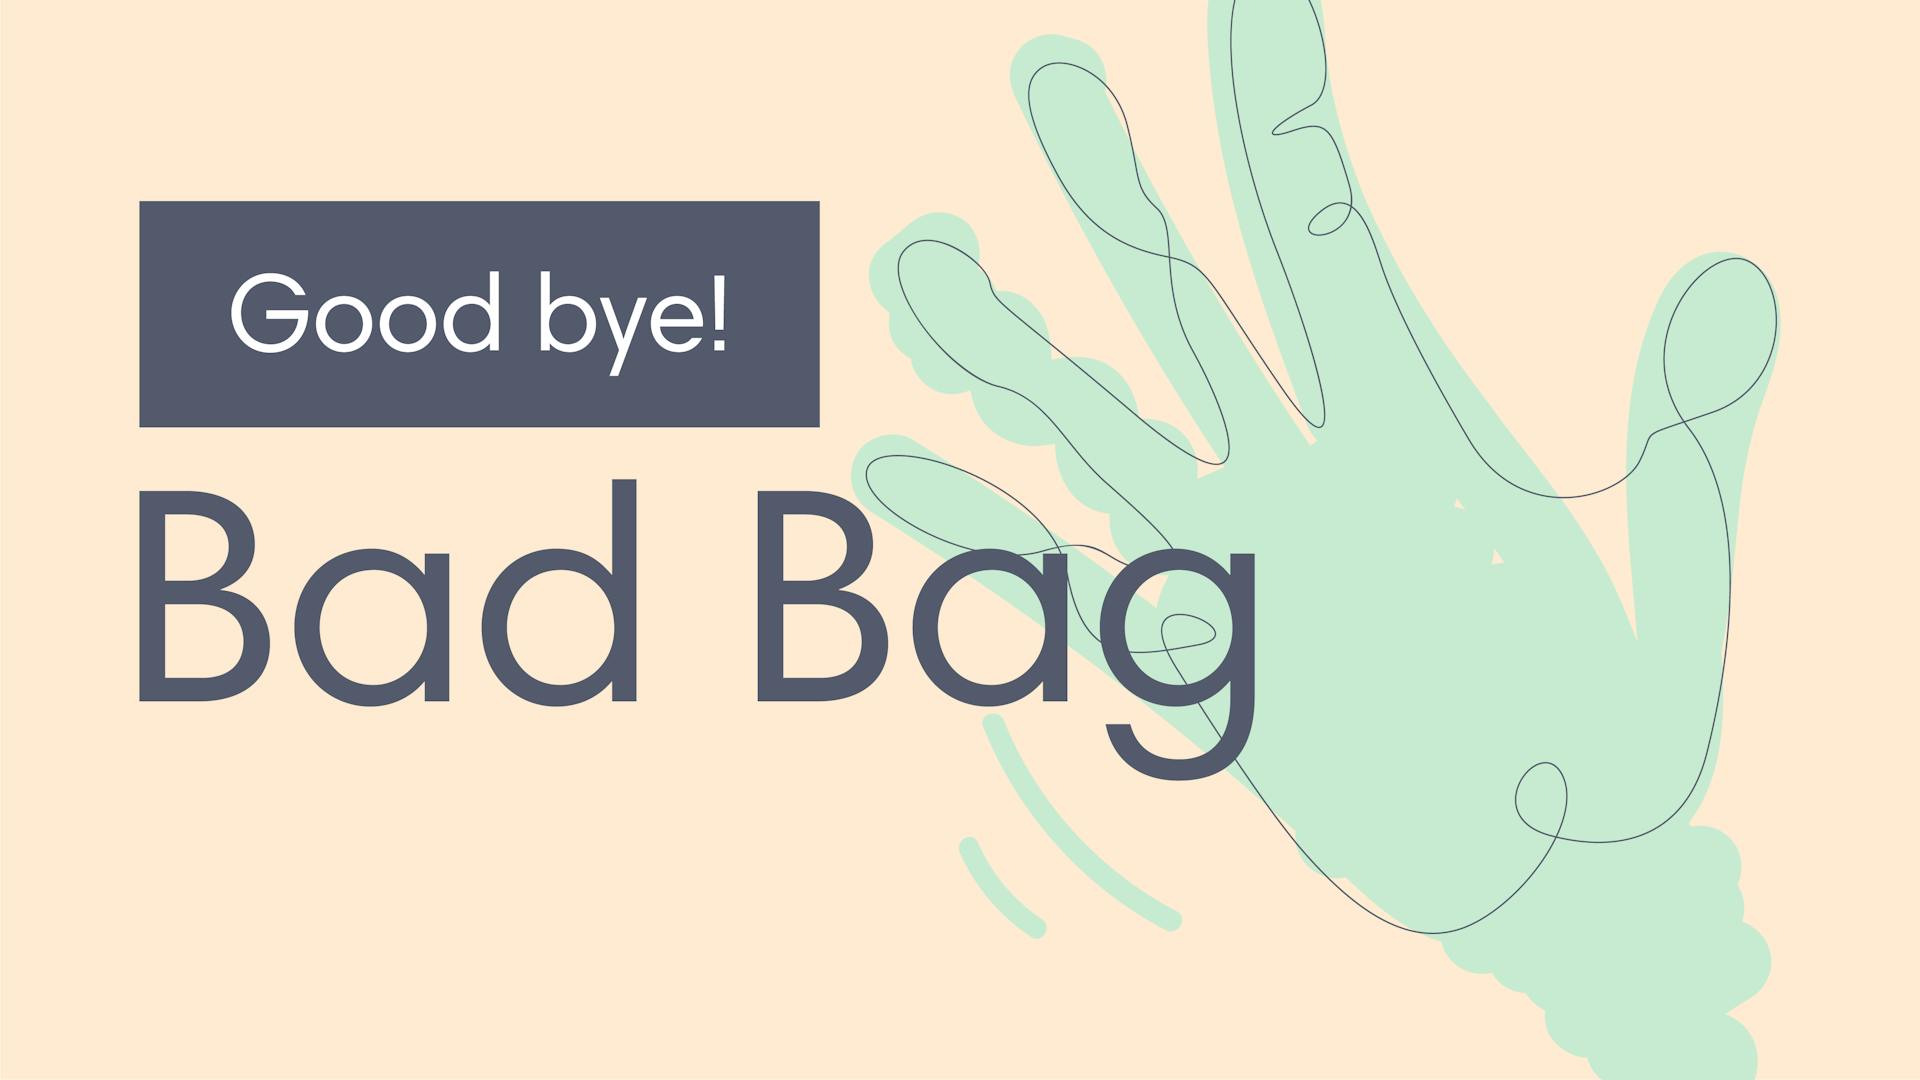 Veriff says goodbye to plastic bags - and you should too!